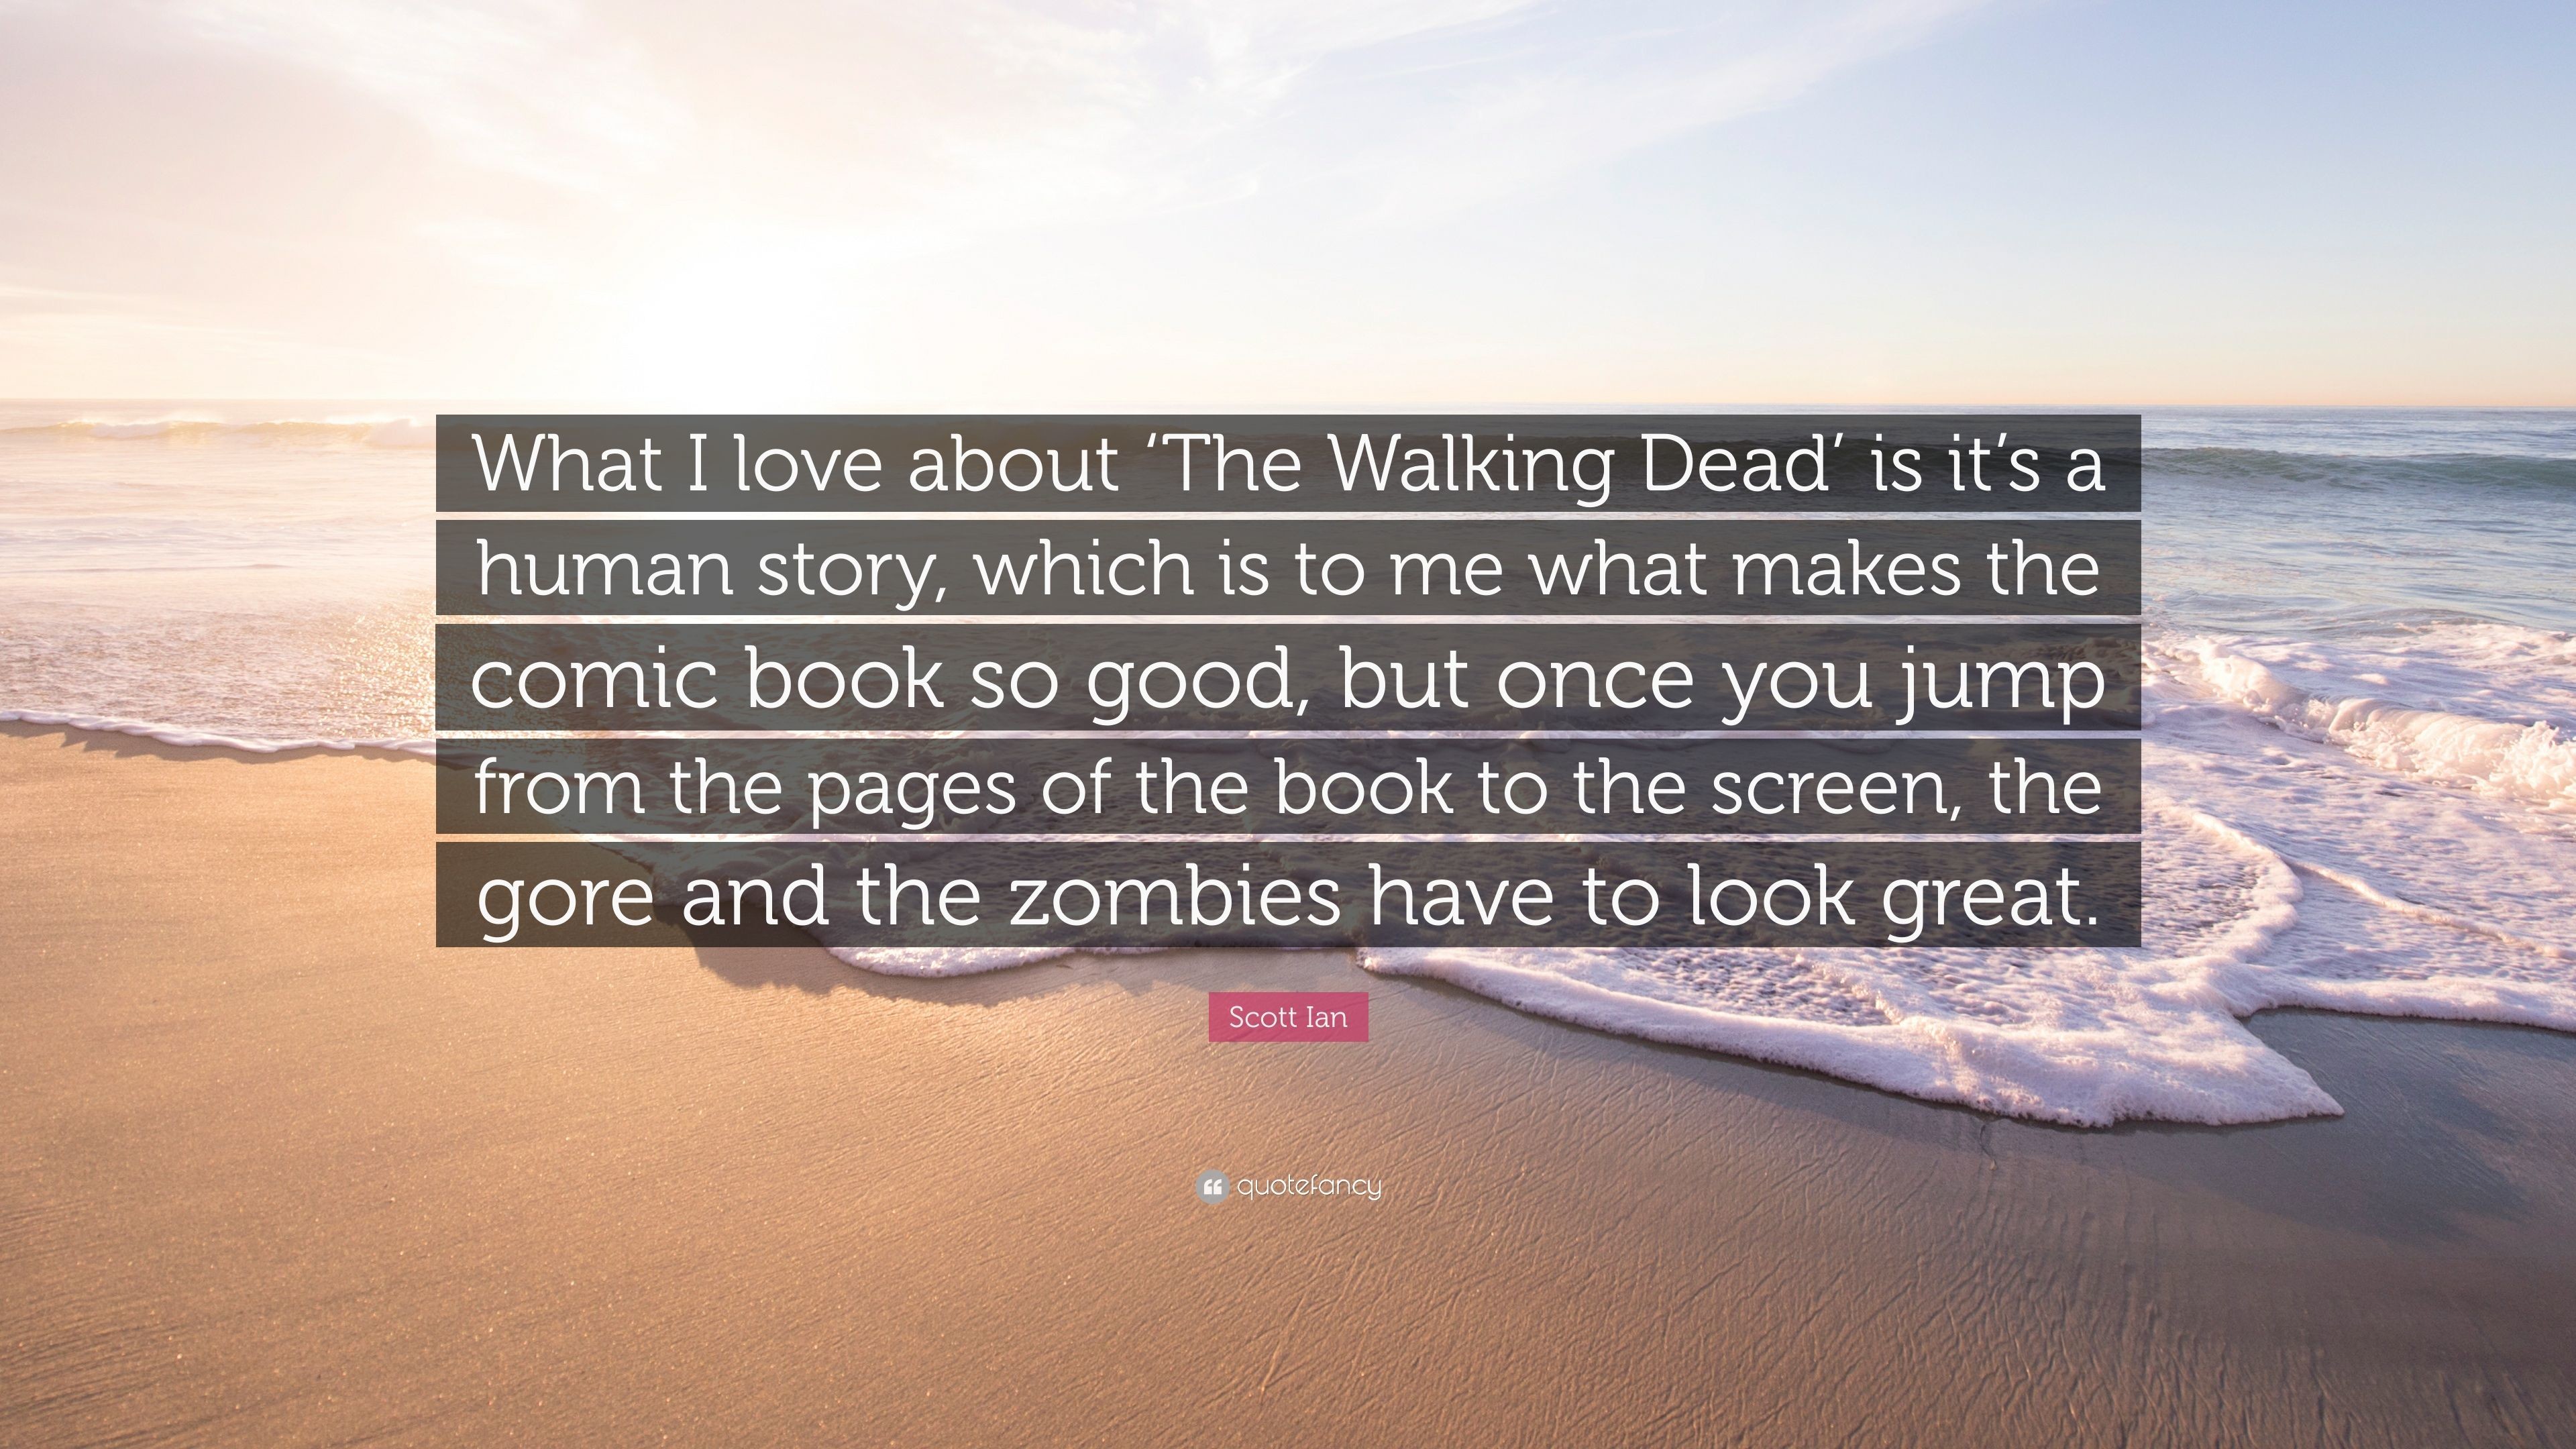 3840x2160 Scott Ian Quote: “What I love about 'The Walking Dead' is it's